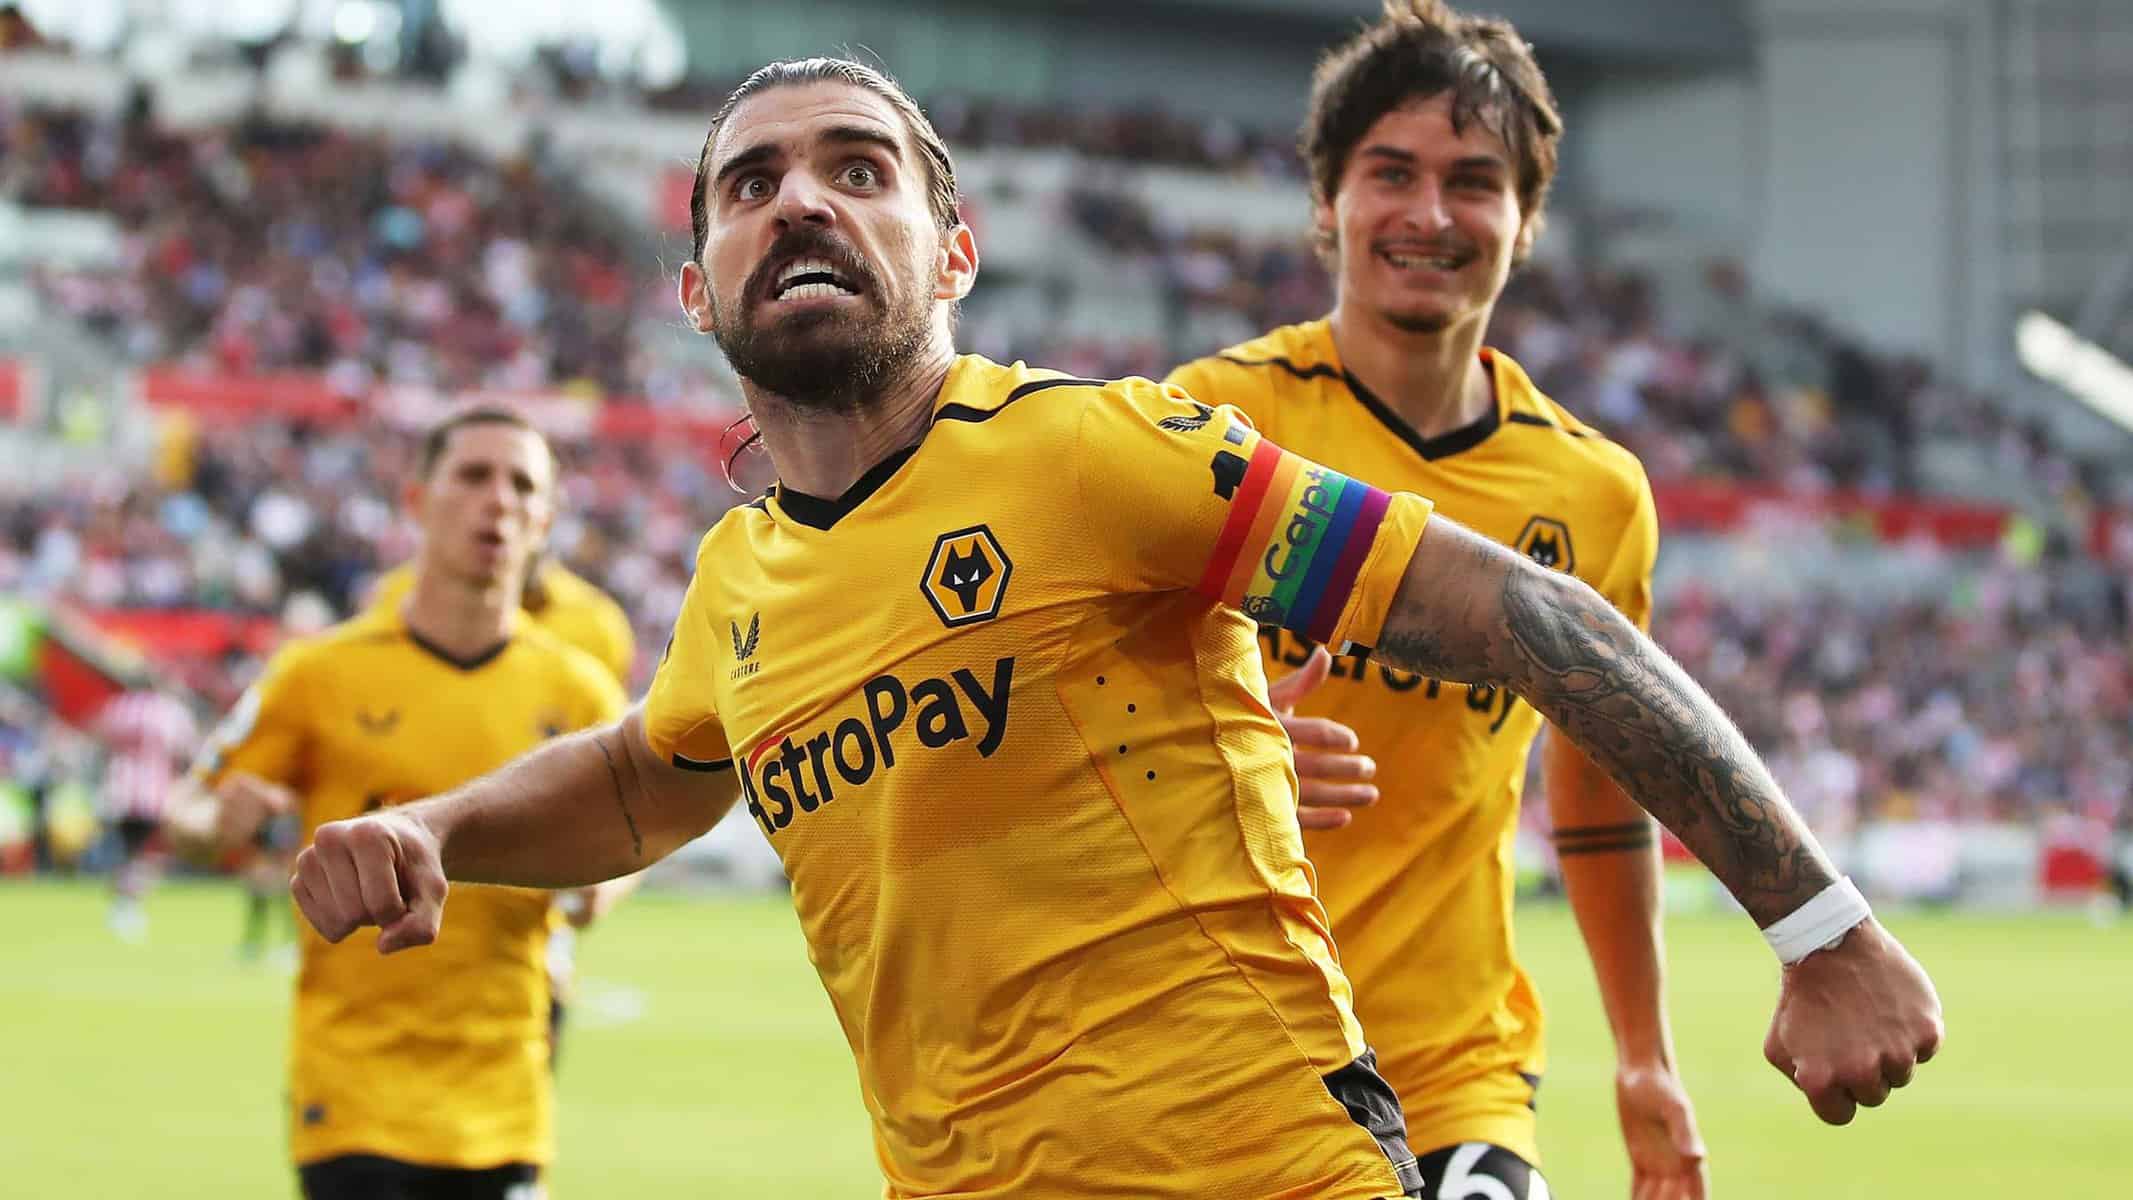 Bid on Neves’ signed armband and support Wolves Foundation Image